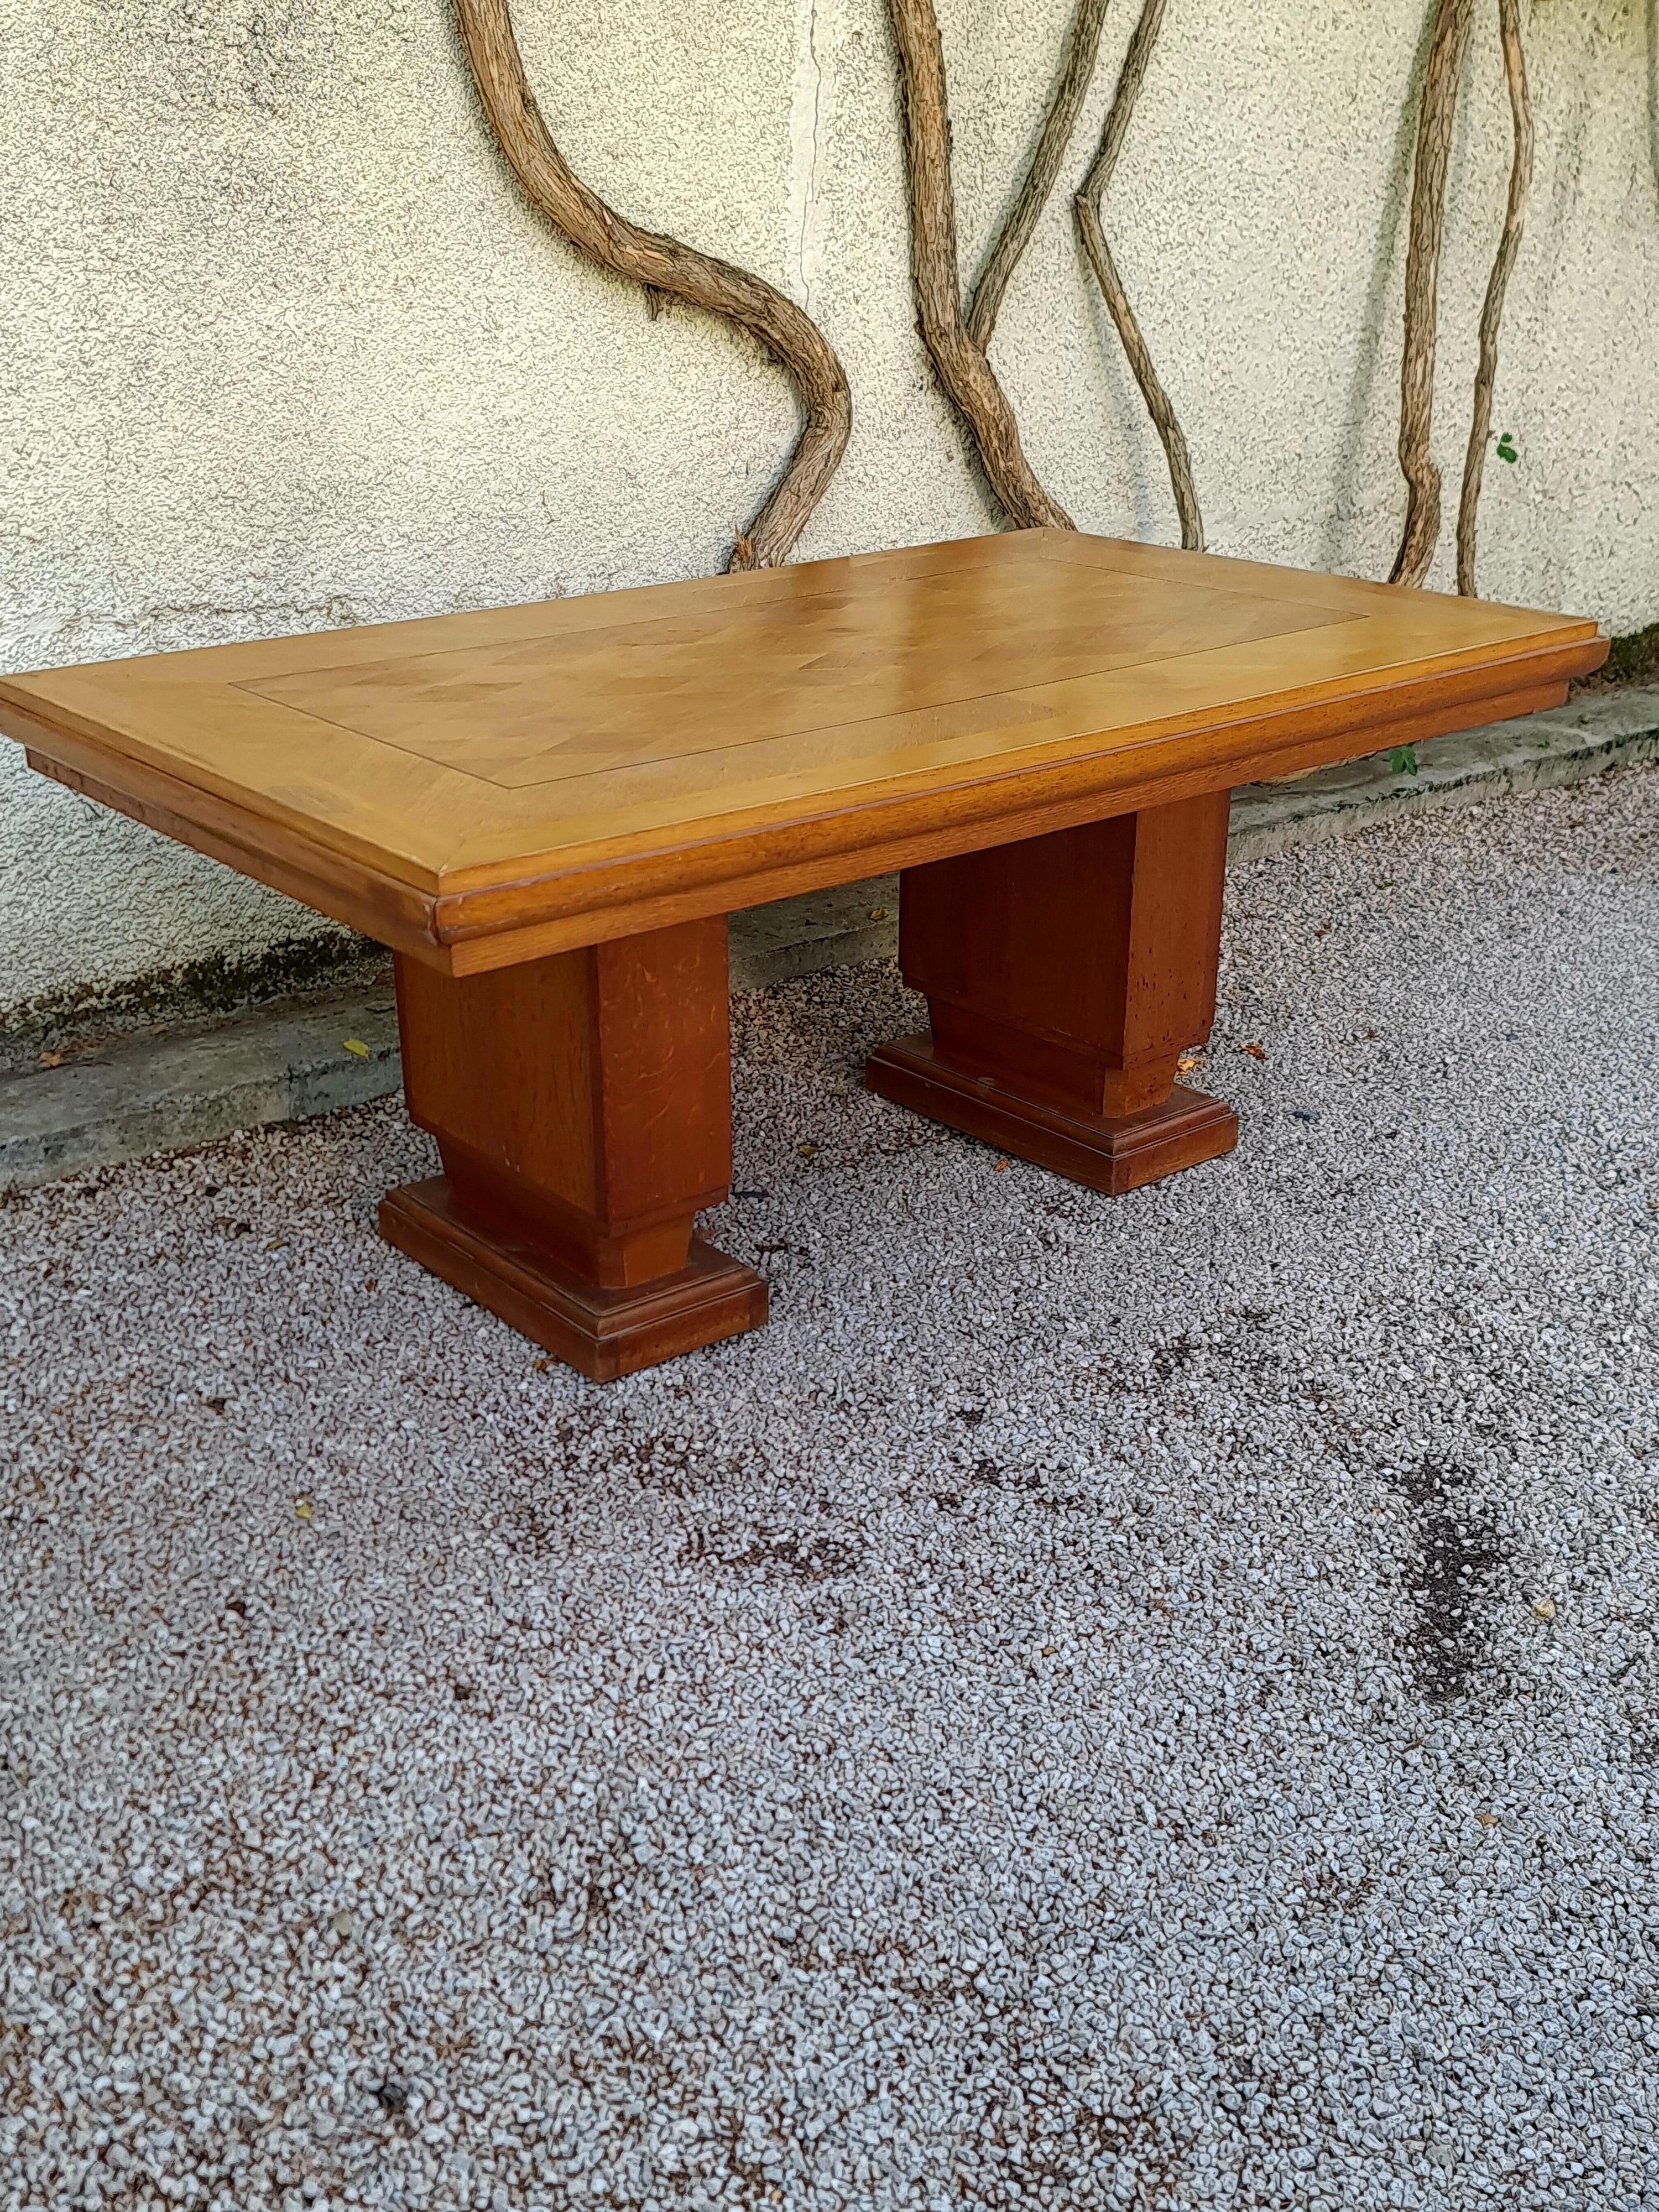 Mid-20th Century French Art Deco Dining Room Table, circa 1940 For Sale